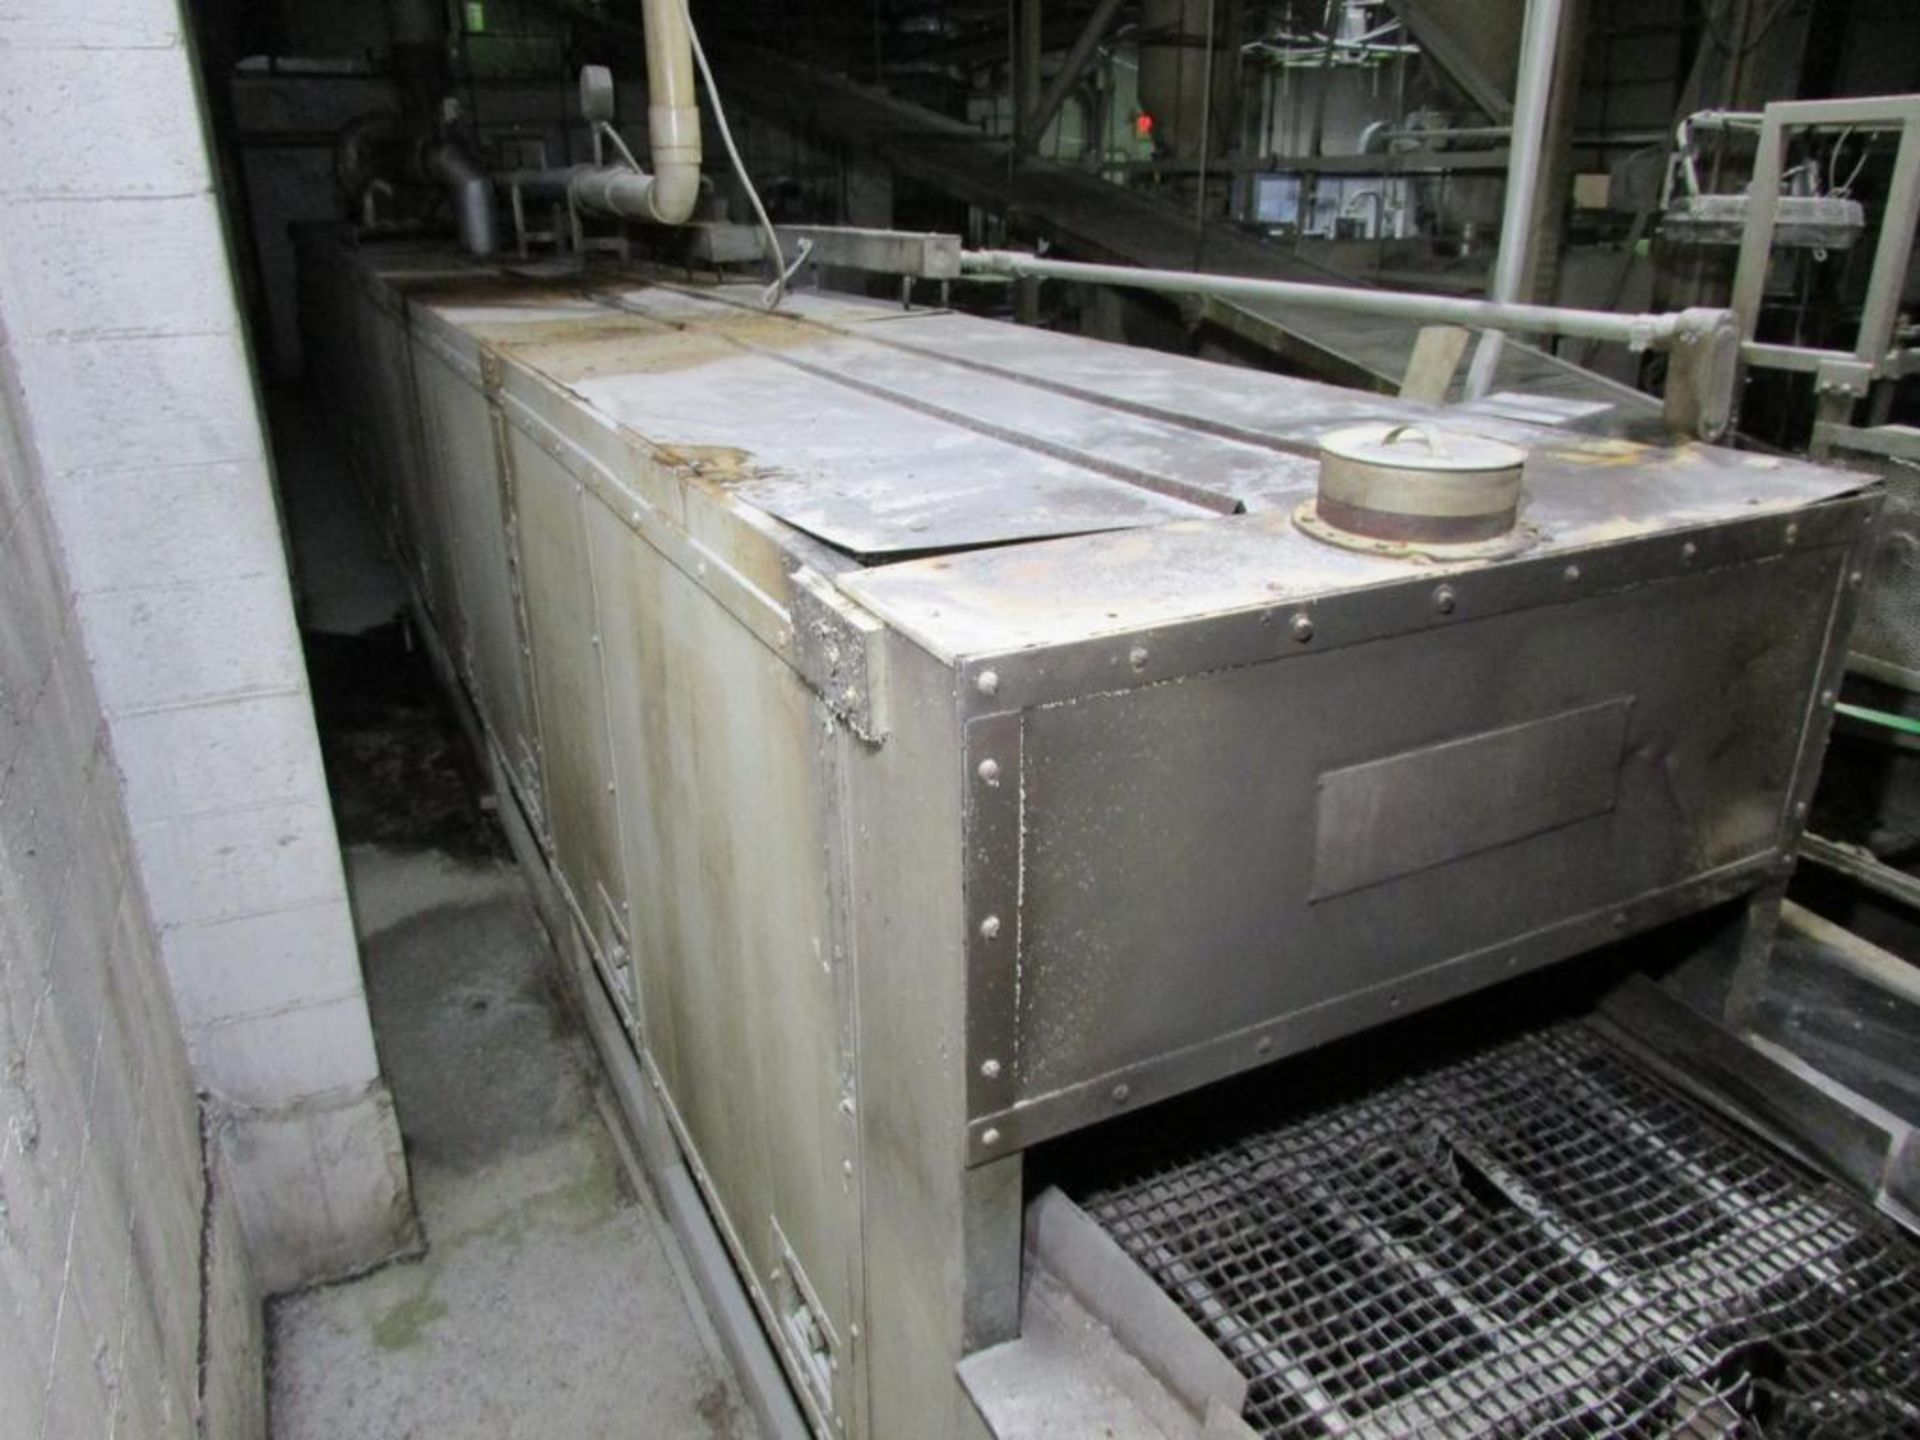 Universal 50'x3' Natural Gas Conveyor Tunnel Oven - Image 15 of 17